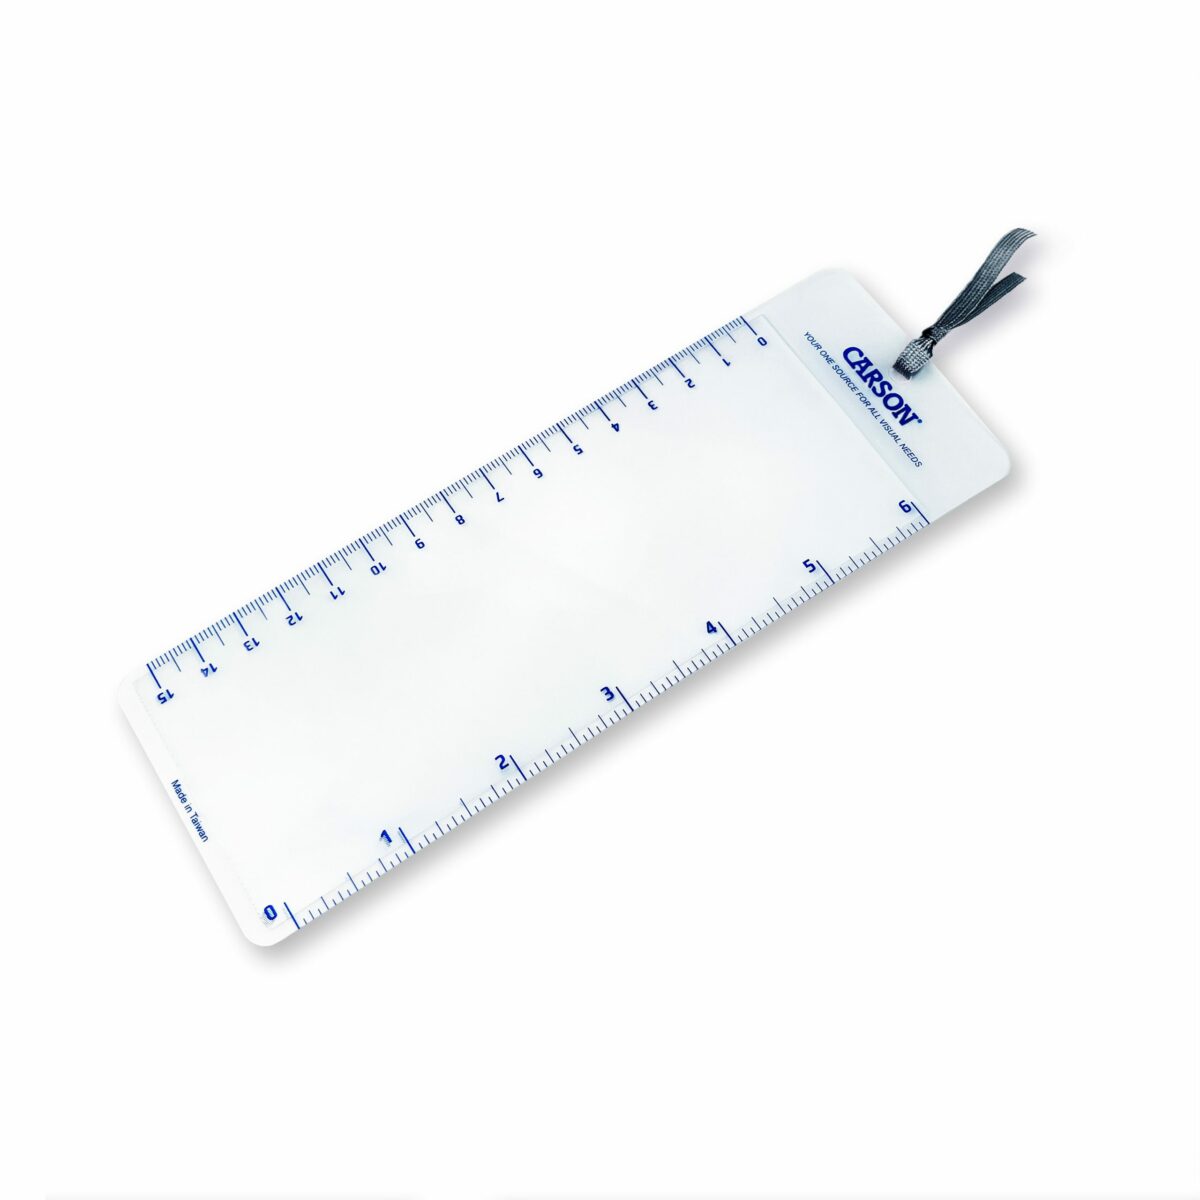 MagniMark™ Fresnel 3x Magnification Page Magnifier with 6″ Ruler